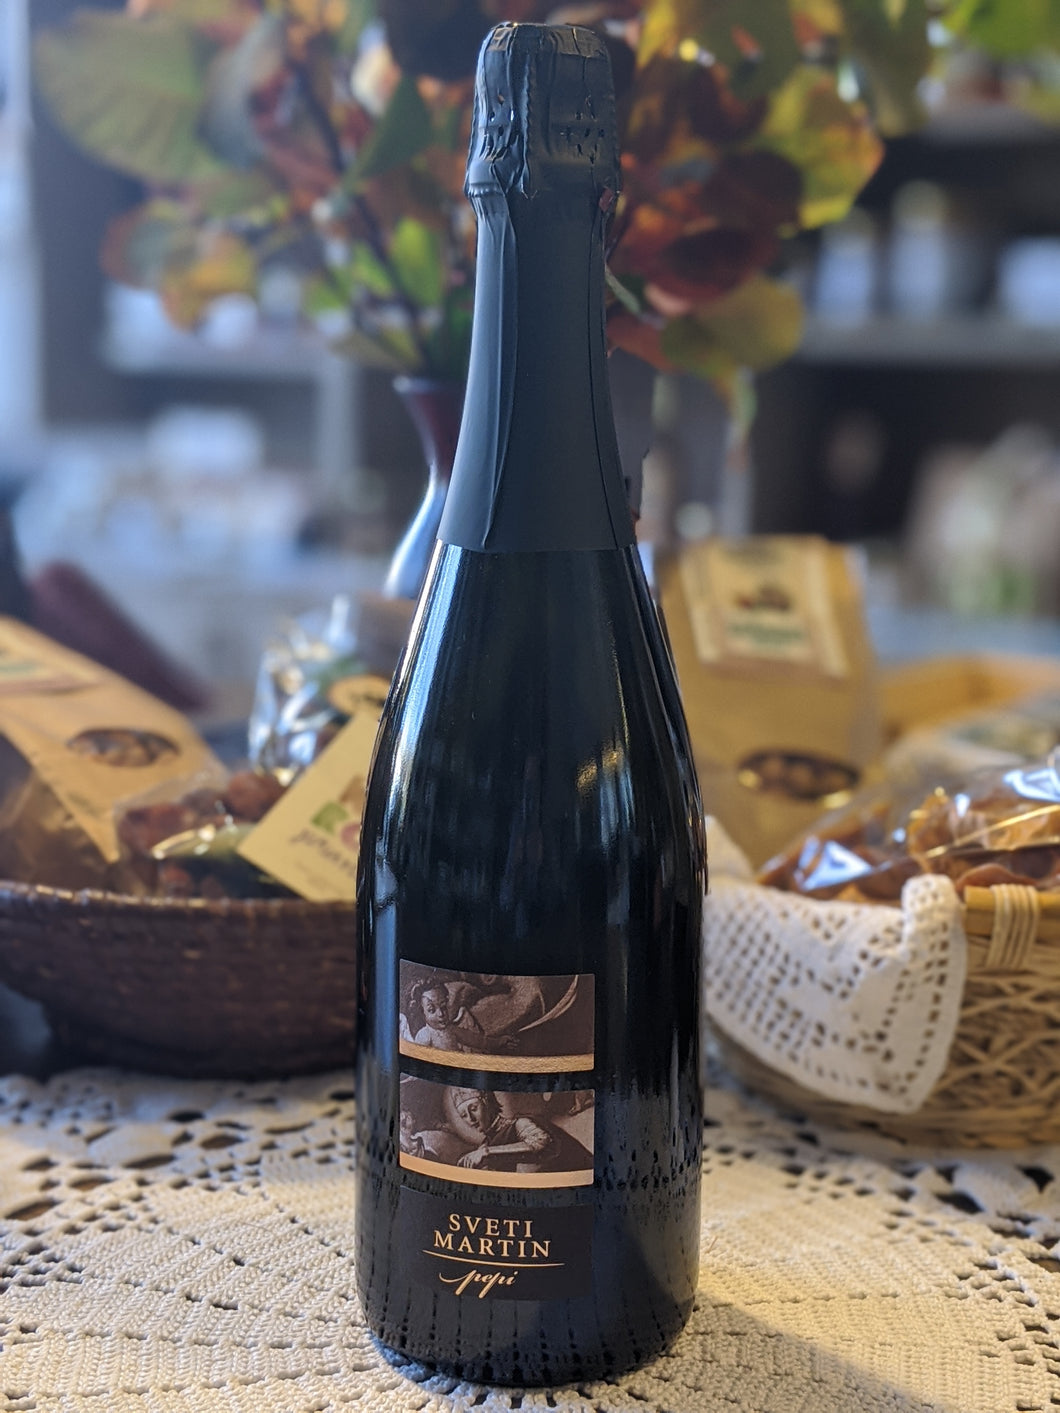 Sparkling wine made from the Svetila pinela variety 0.75-quality ZGP wine